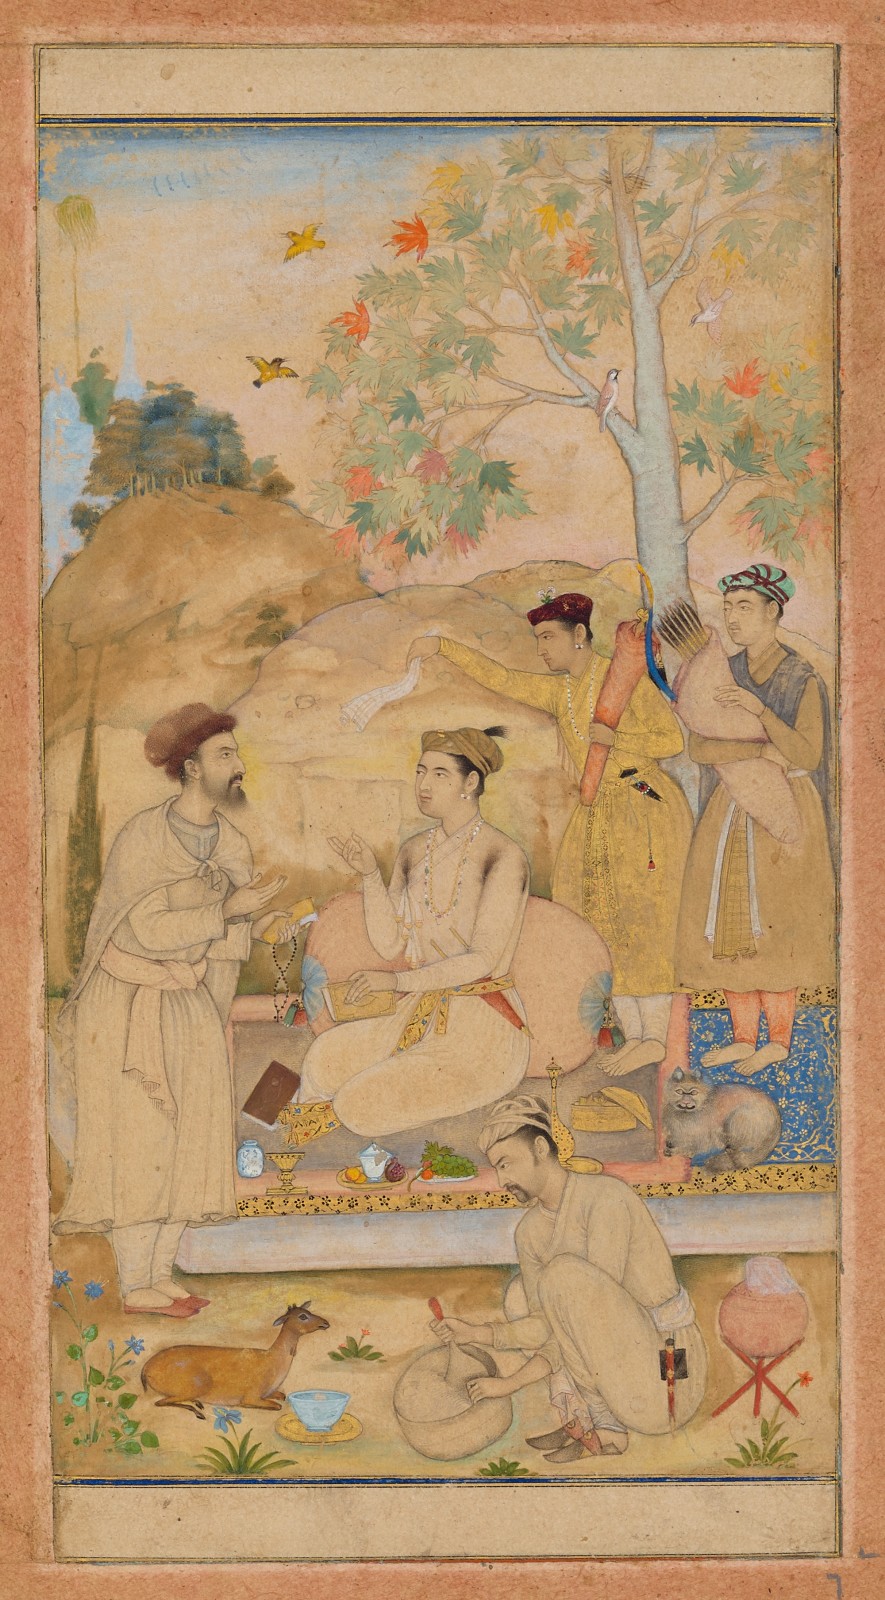 A Prince Converses with a Sage, Mughal, attributed to Govardhan, 1605-08